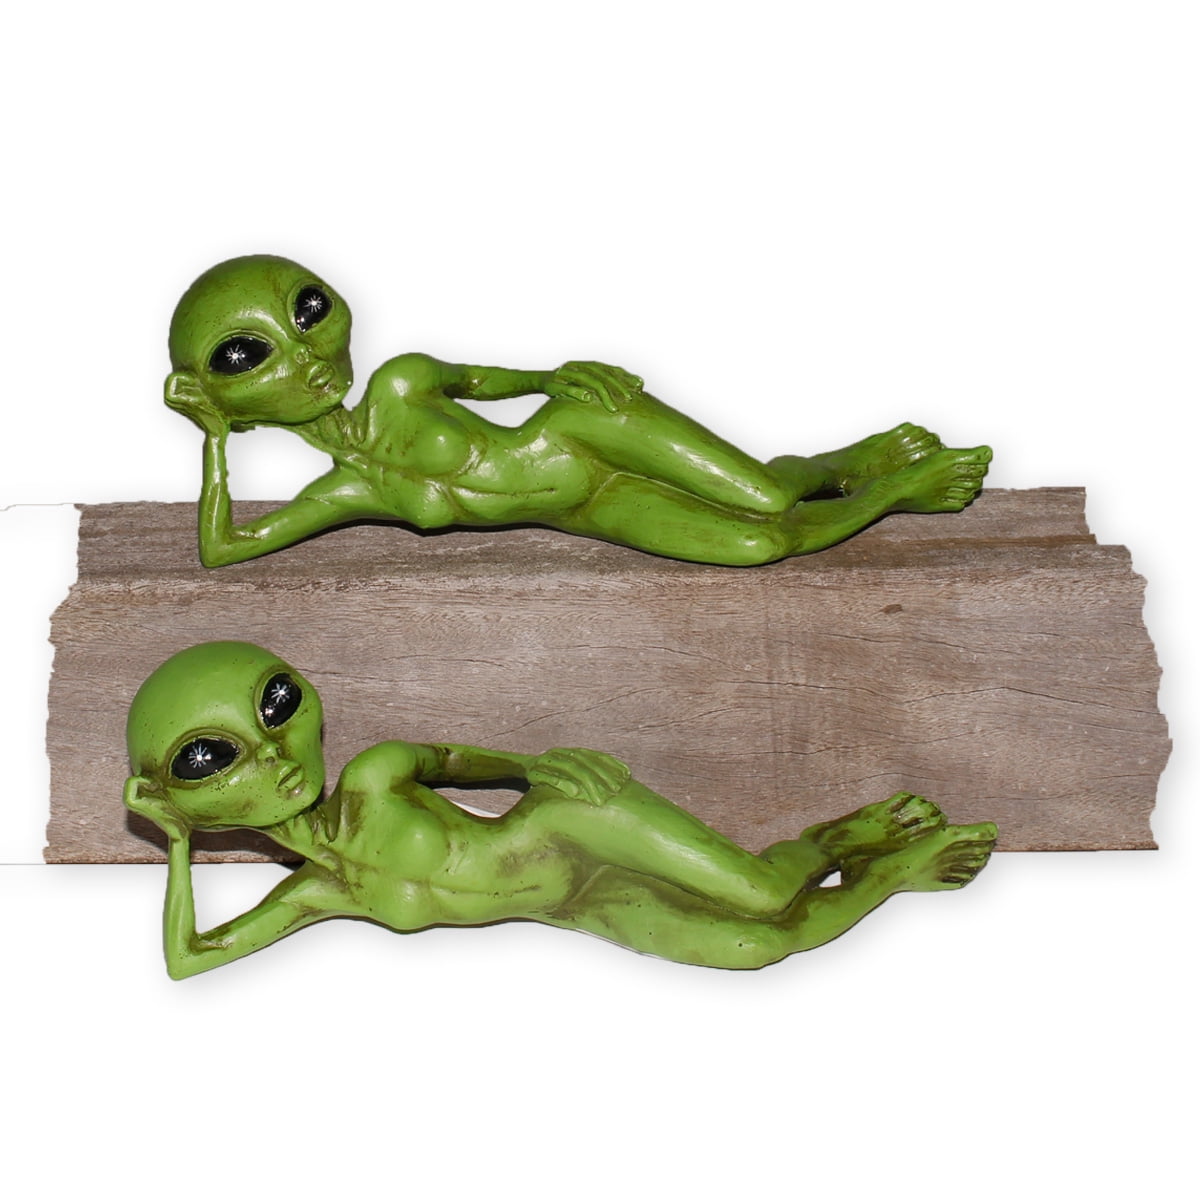 Sexy Alien 10 INCH Laying Extraterrestrial 'Pin-up' Statue 'Summer